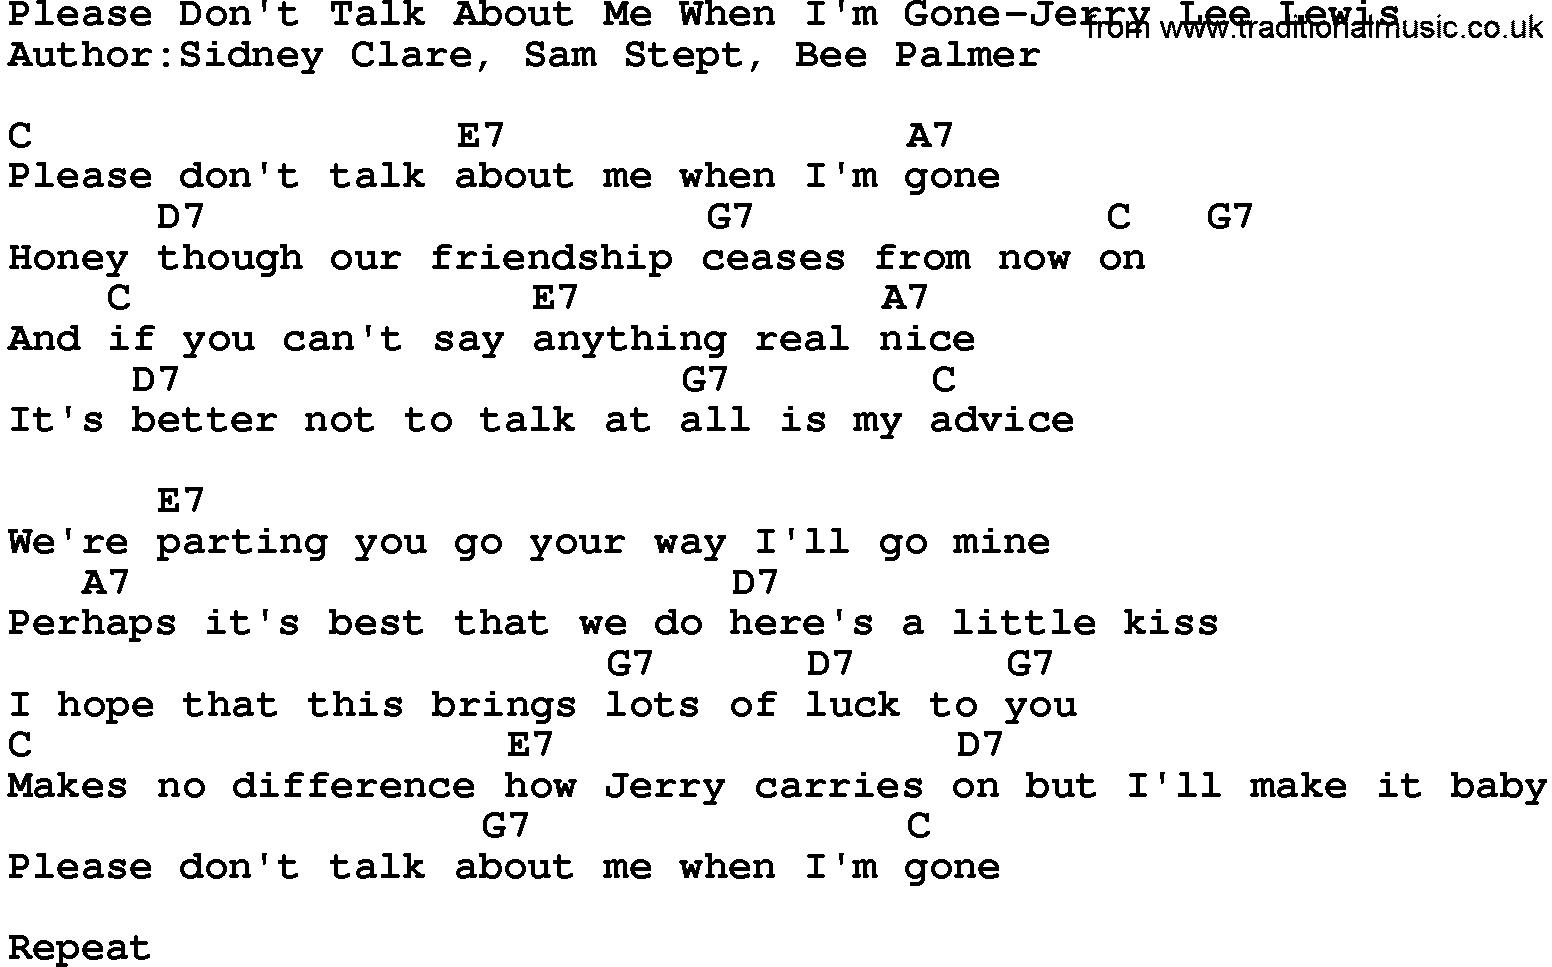 Country Music Please Don T Talk About Me When I M Gone Jerry Lee Lewis Lyrics And Chords All lyrics, chords & sheet music arrangement on this site are provided for educational purposes only. traditional music library